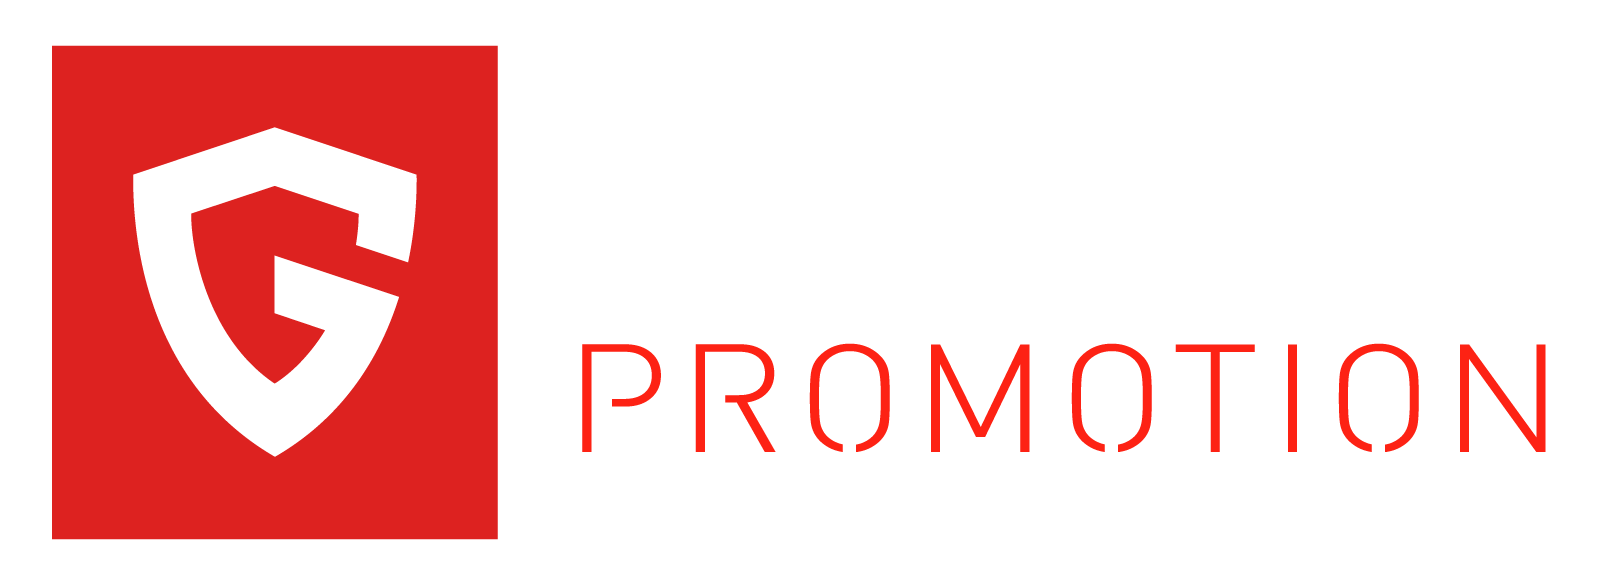 https://www.graphidpromotion.com/wp-content/uploads/2019/07/graphid-promotion-Marchio-in-bianco-01.png